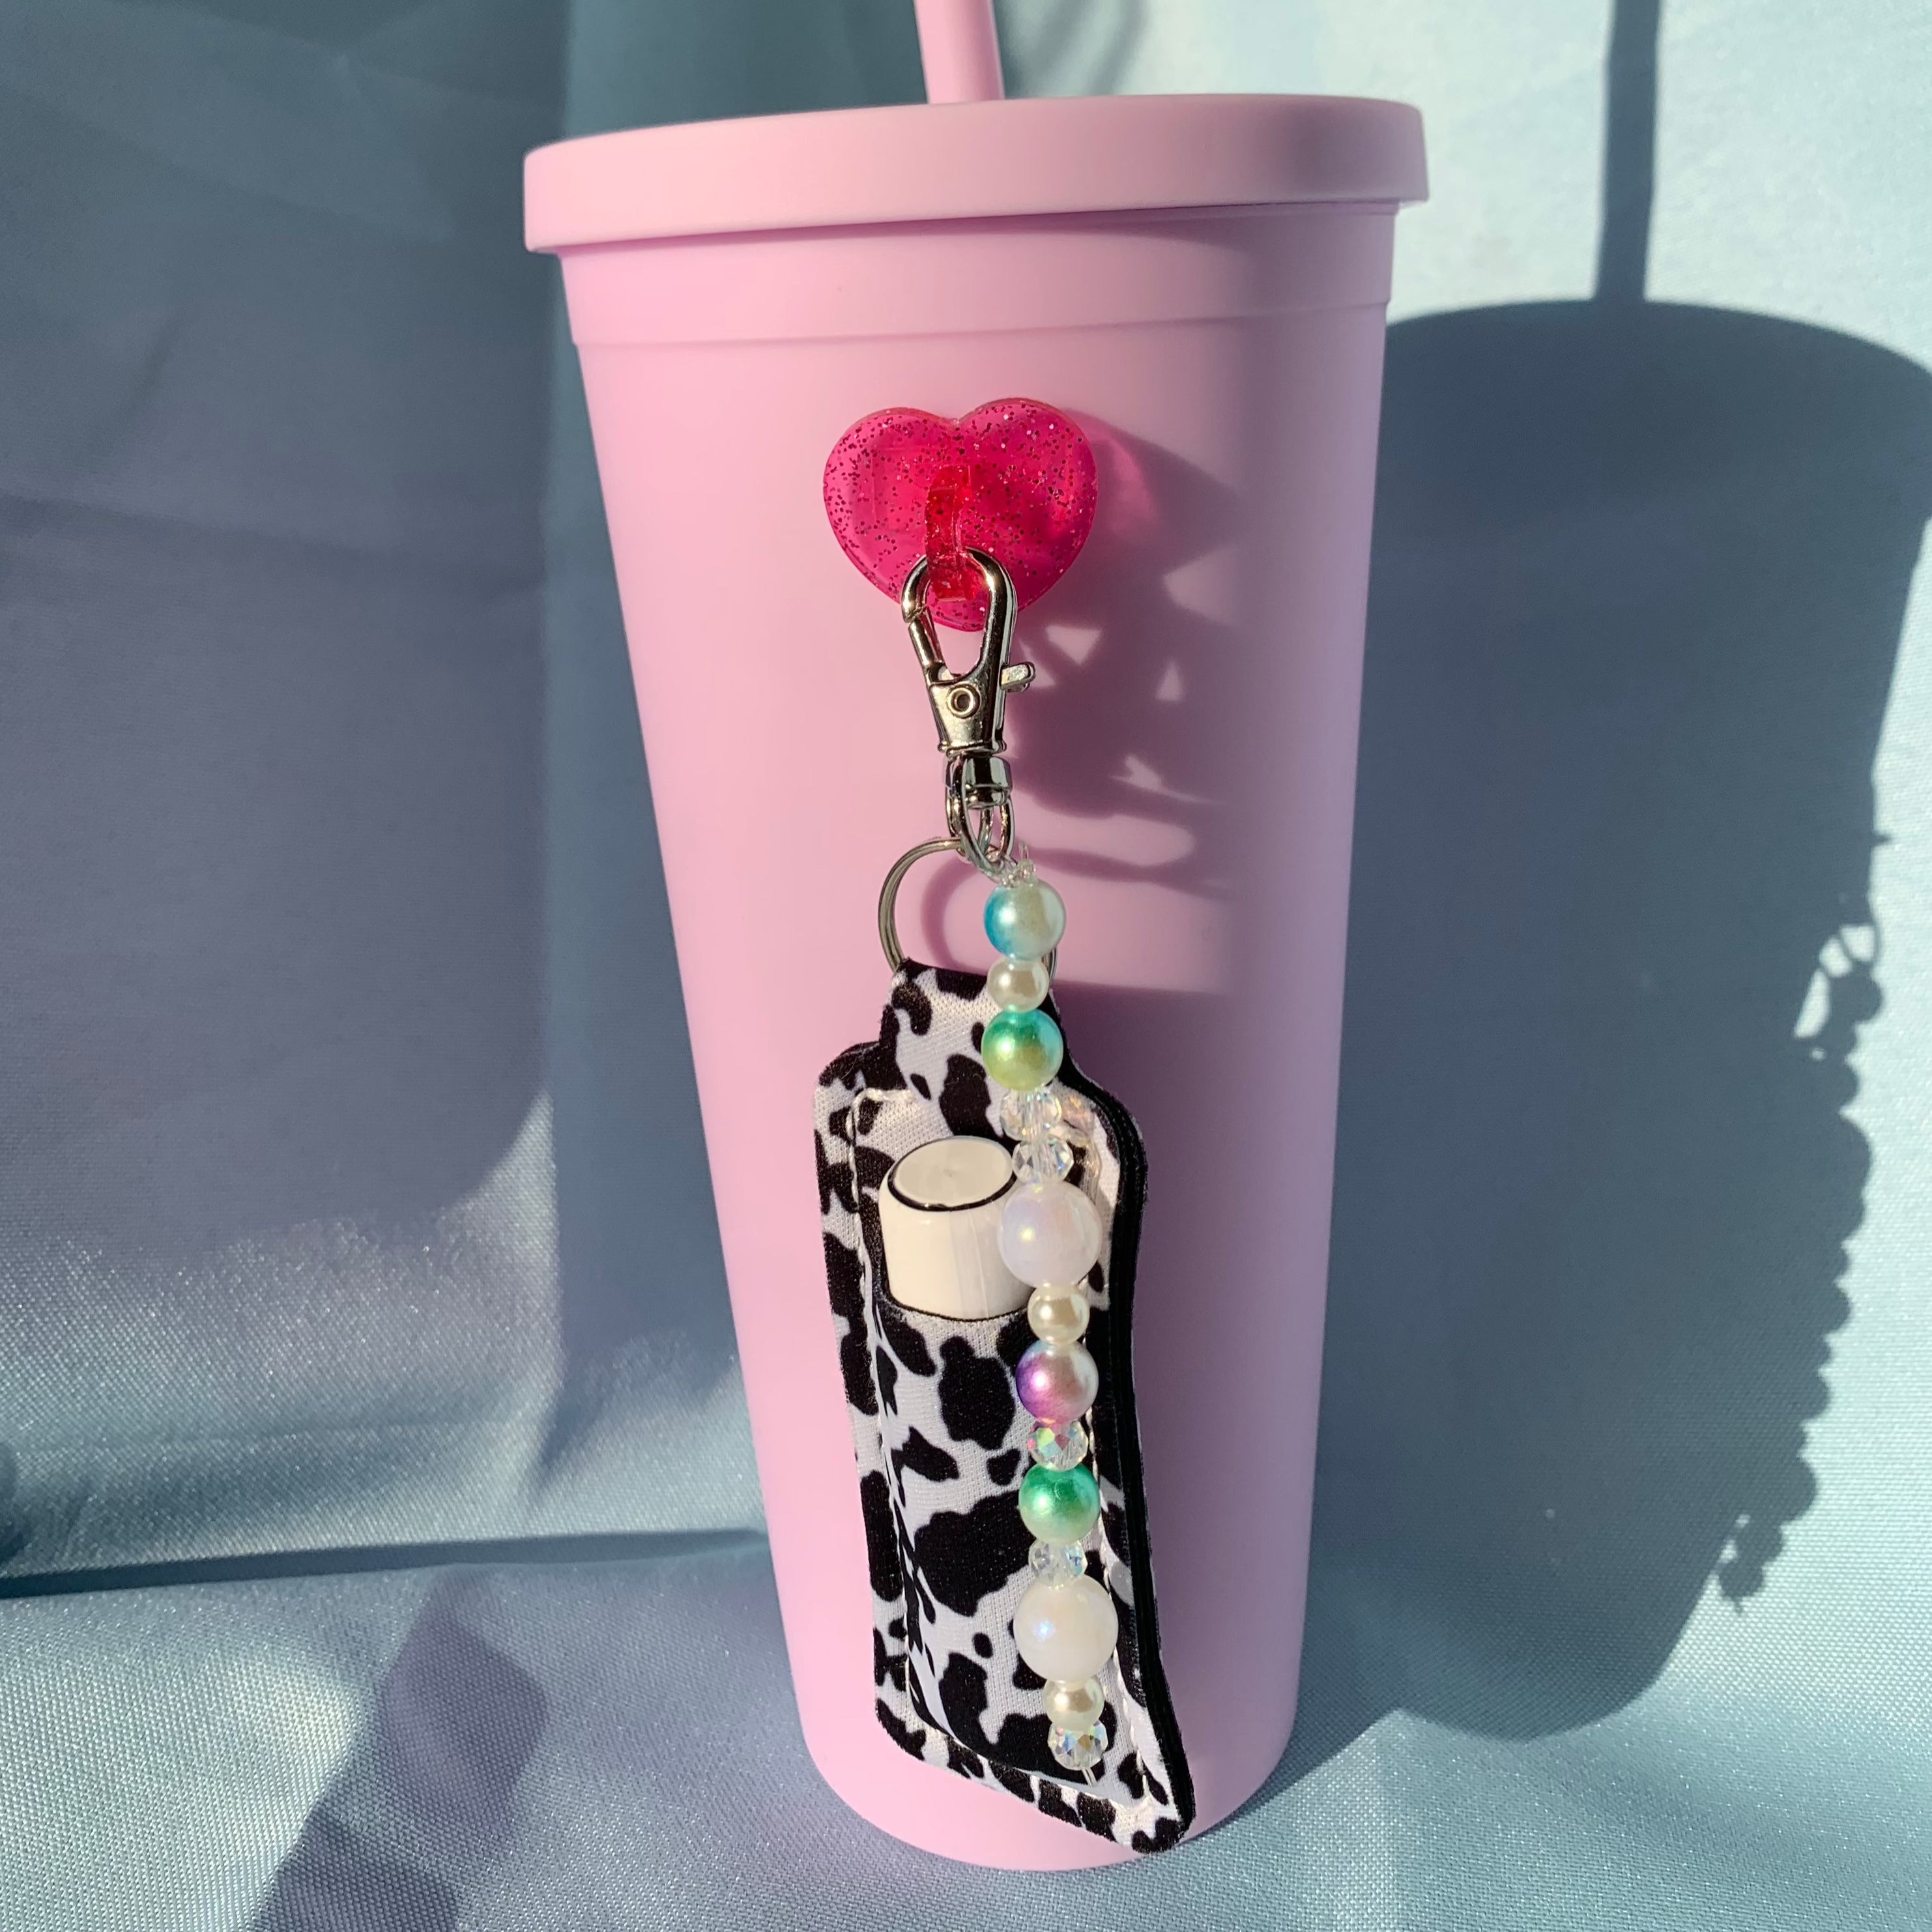 CharCharms Stick On Water Bottle Stick-On Hook